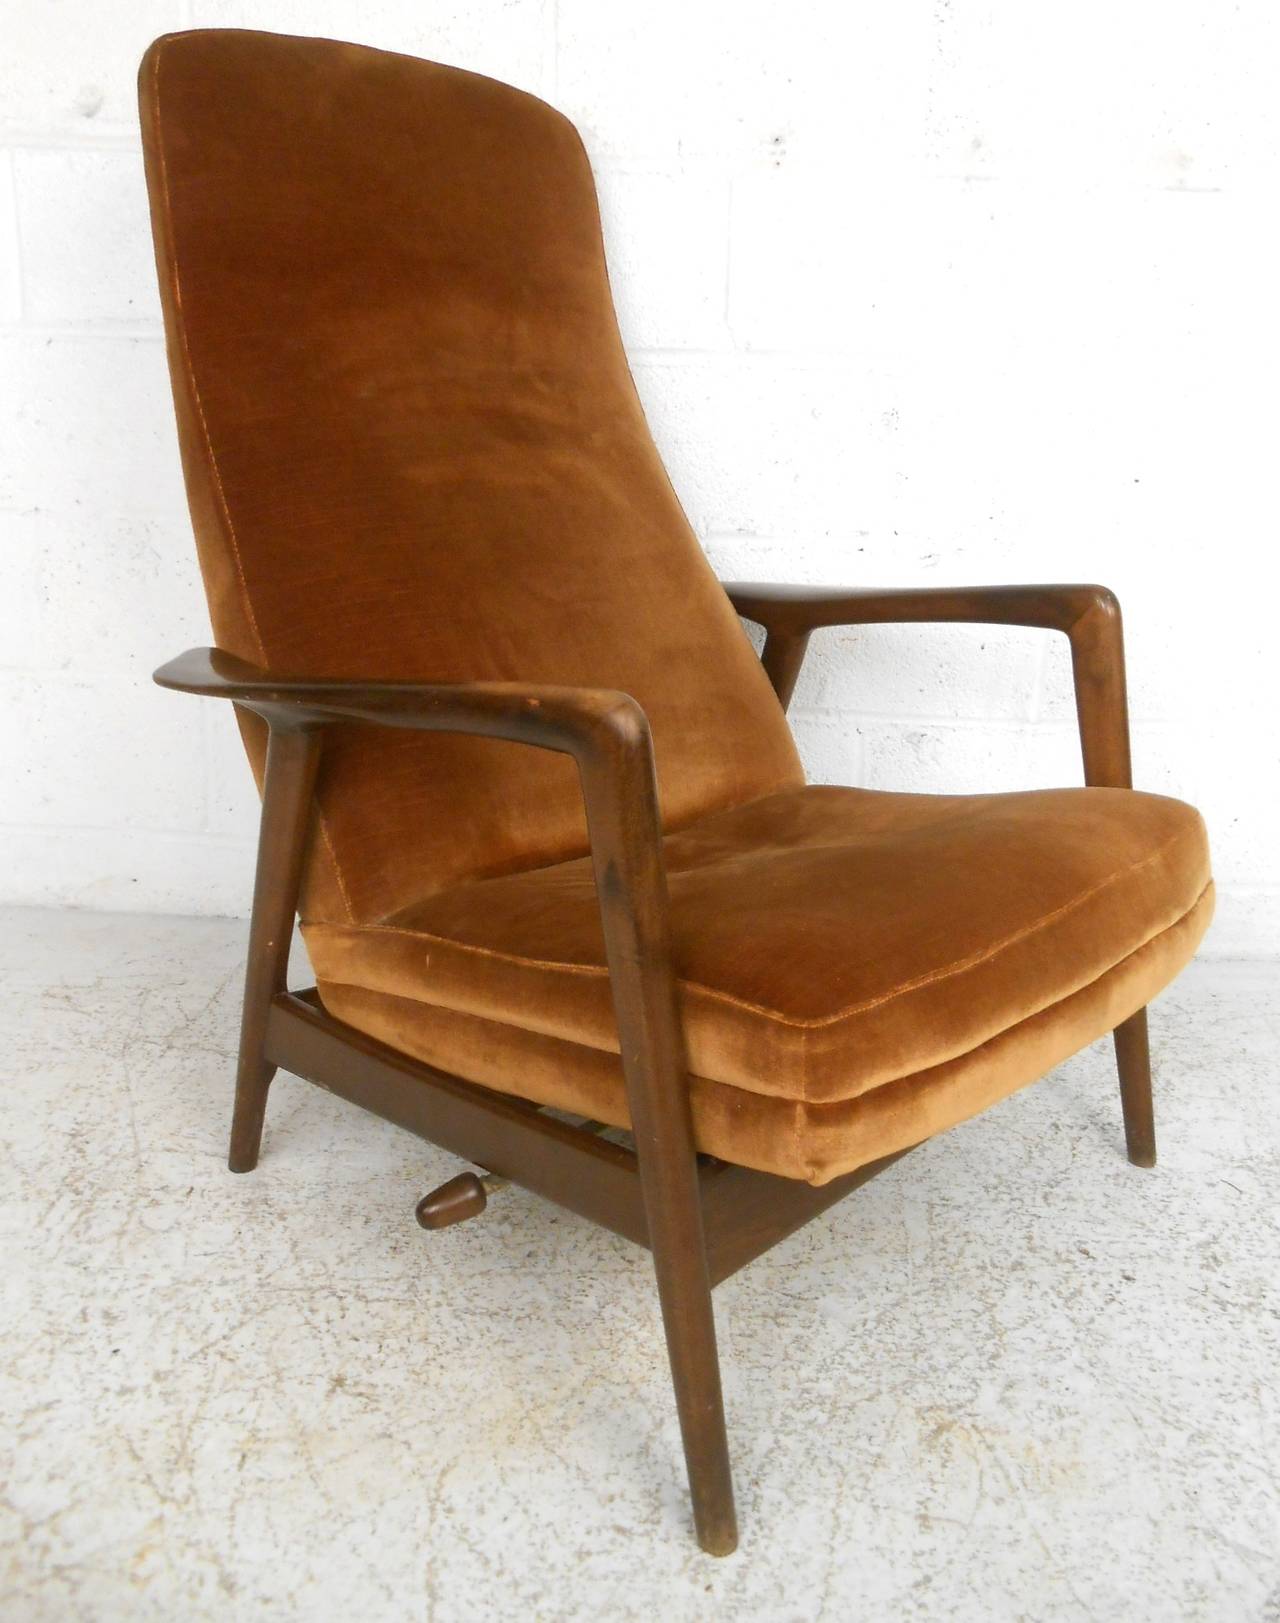 Mid-Century Modern Folke Ohlsson Lounge Chair and Ottoman For Sale at ...